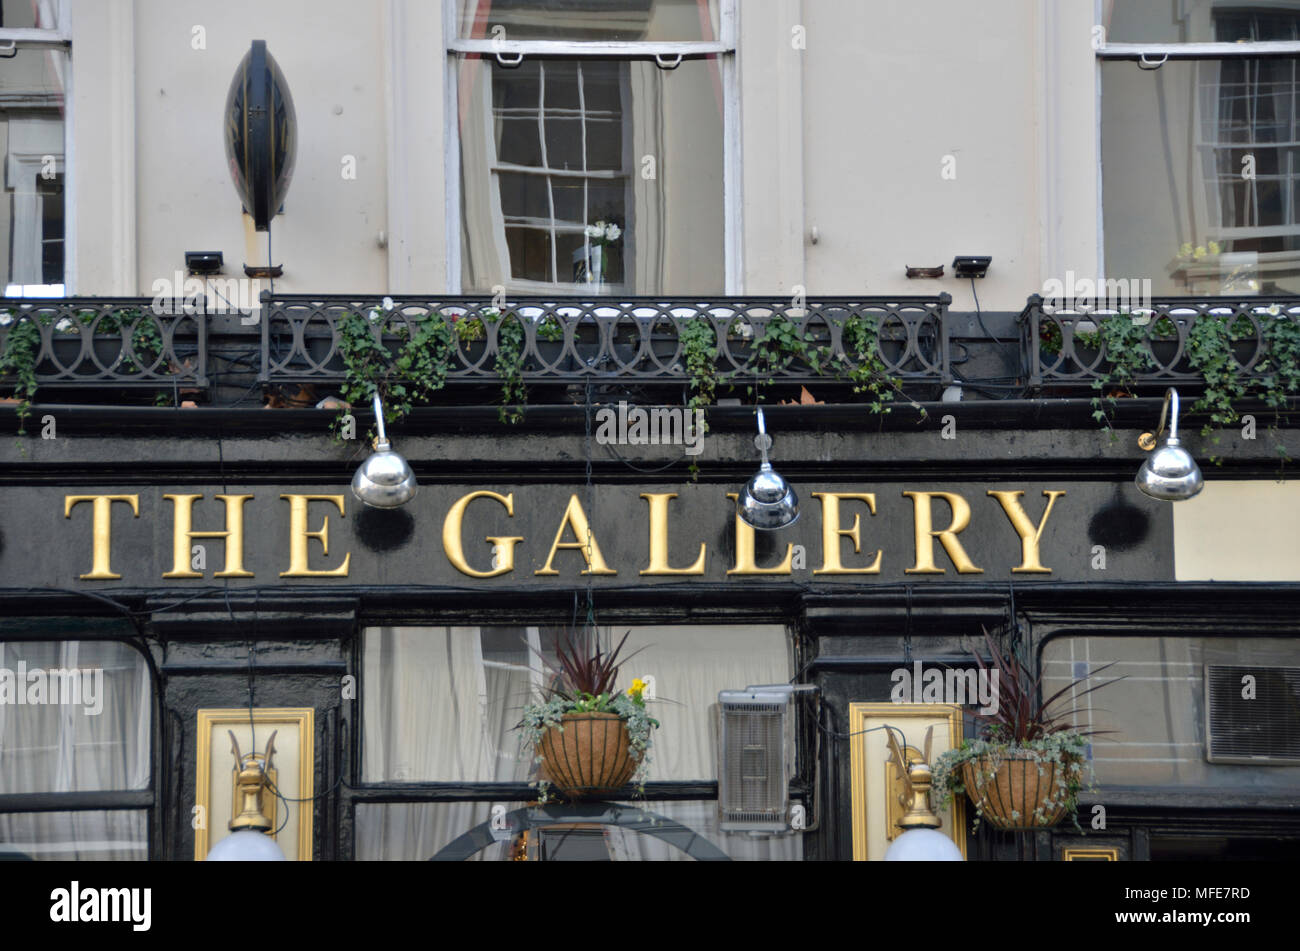 Gallery, West End London, Commercial Architects, Winchester, London